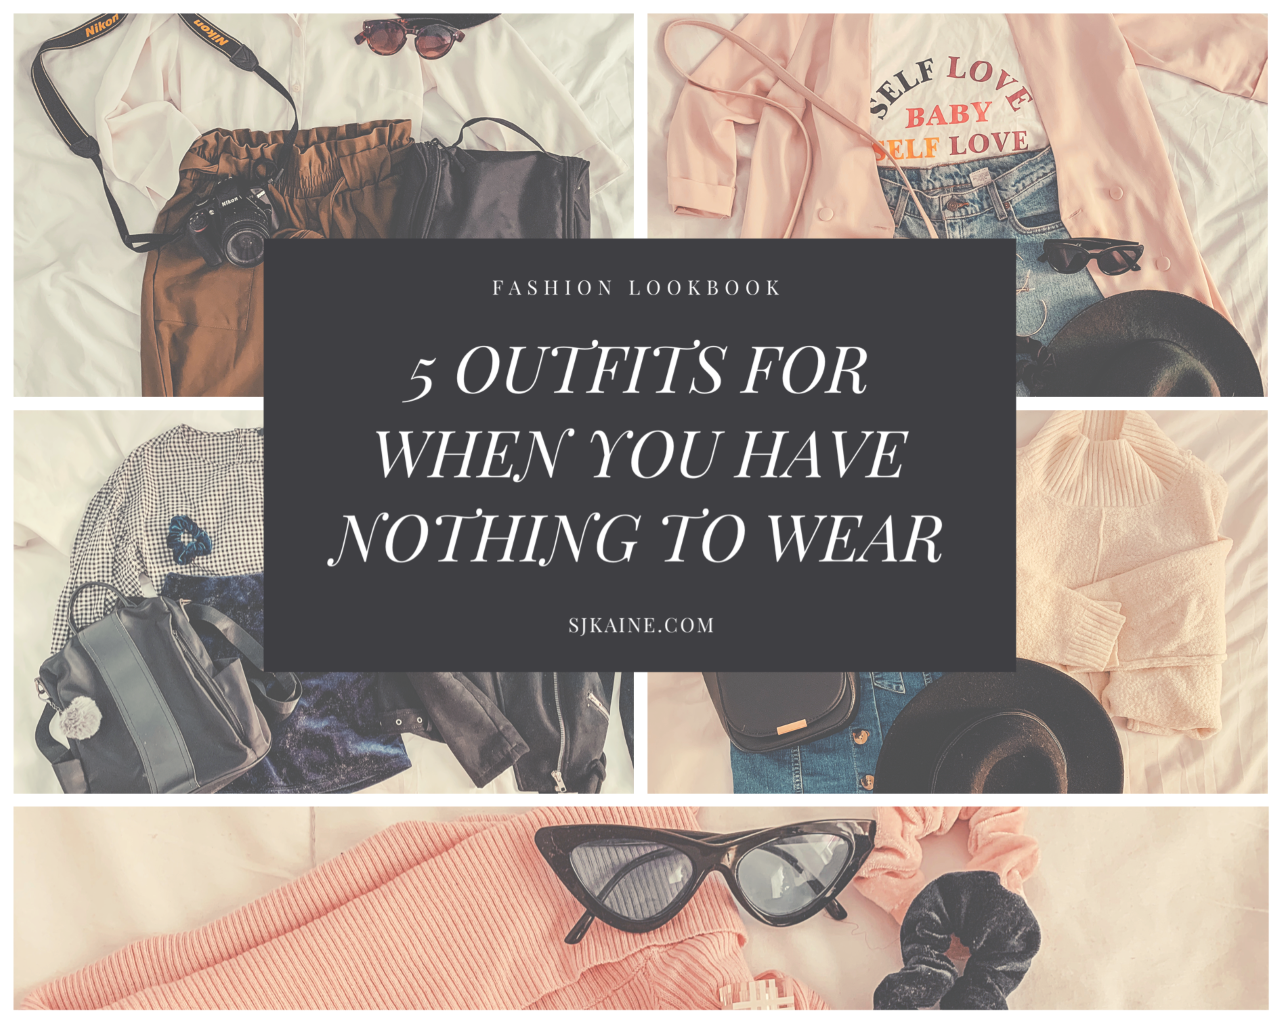 5 Quick Looks For When You Have Nothing To Wear